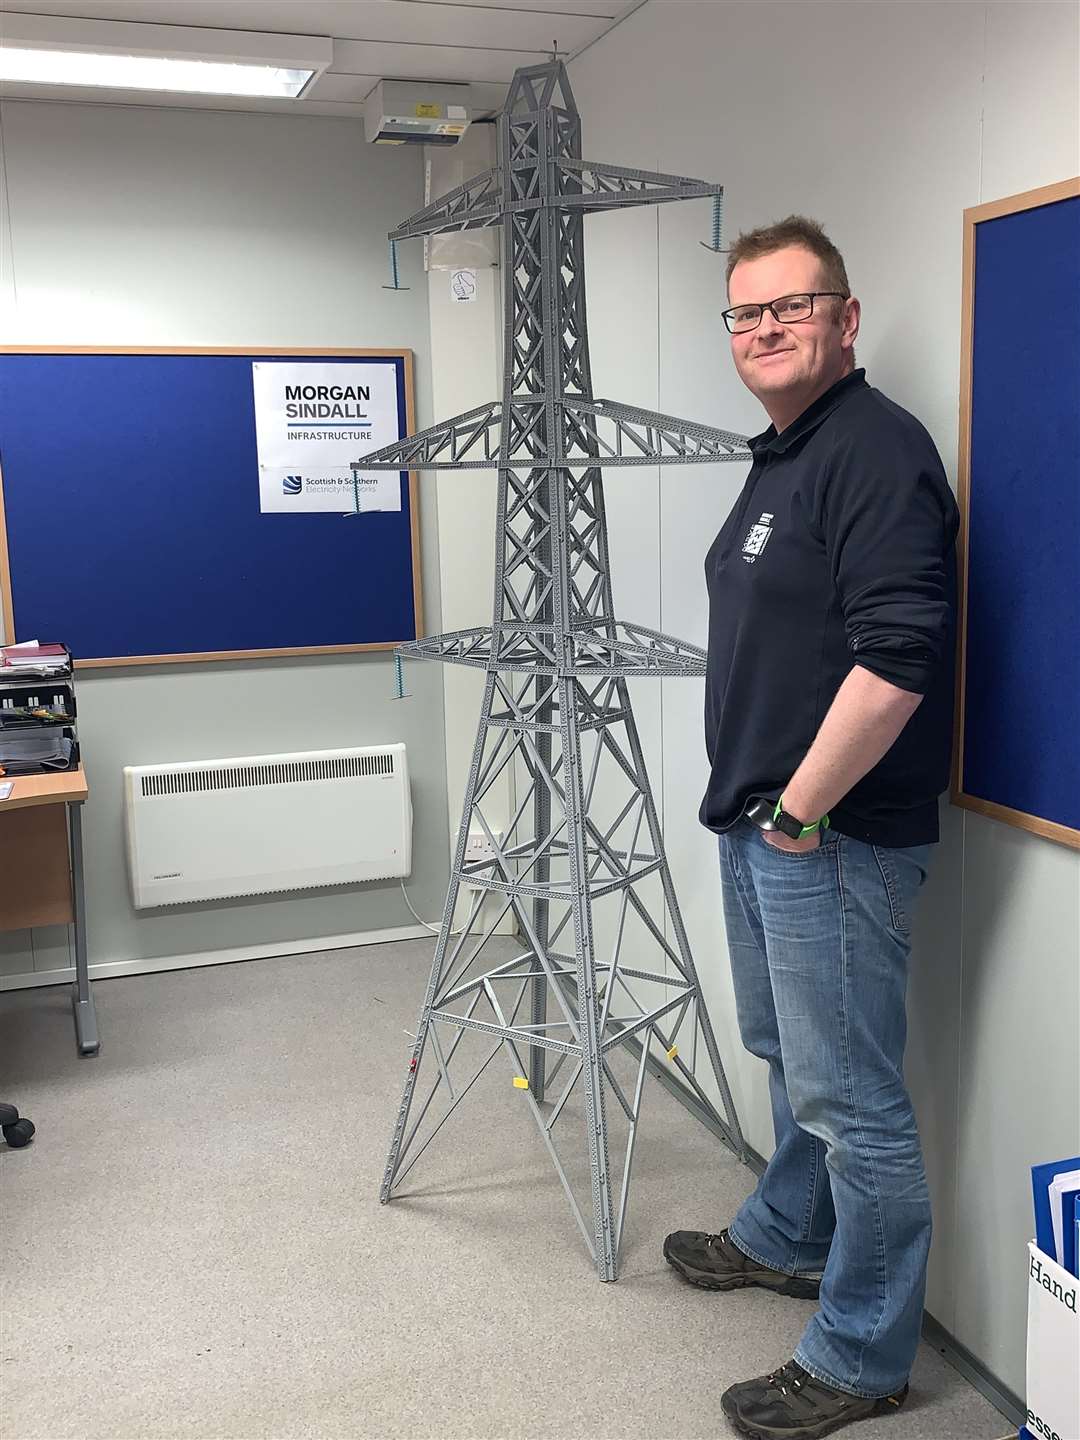 Grahame Kirsopp with his Lego transmission tower.